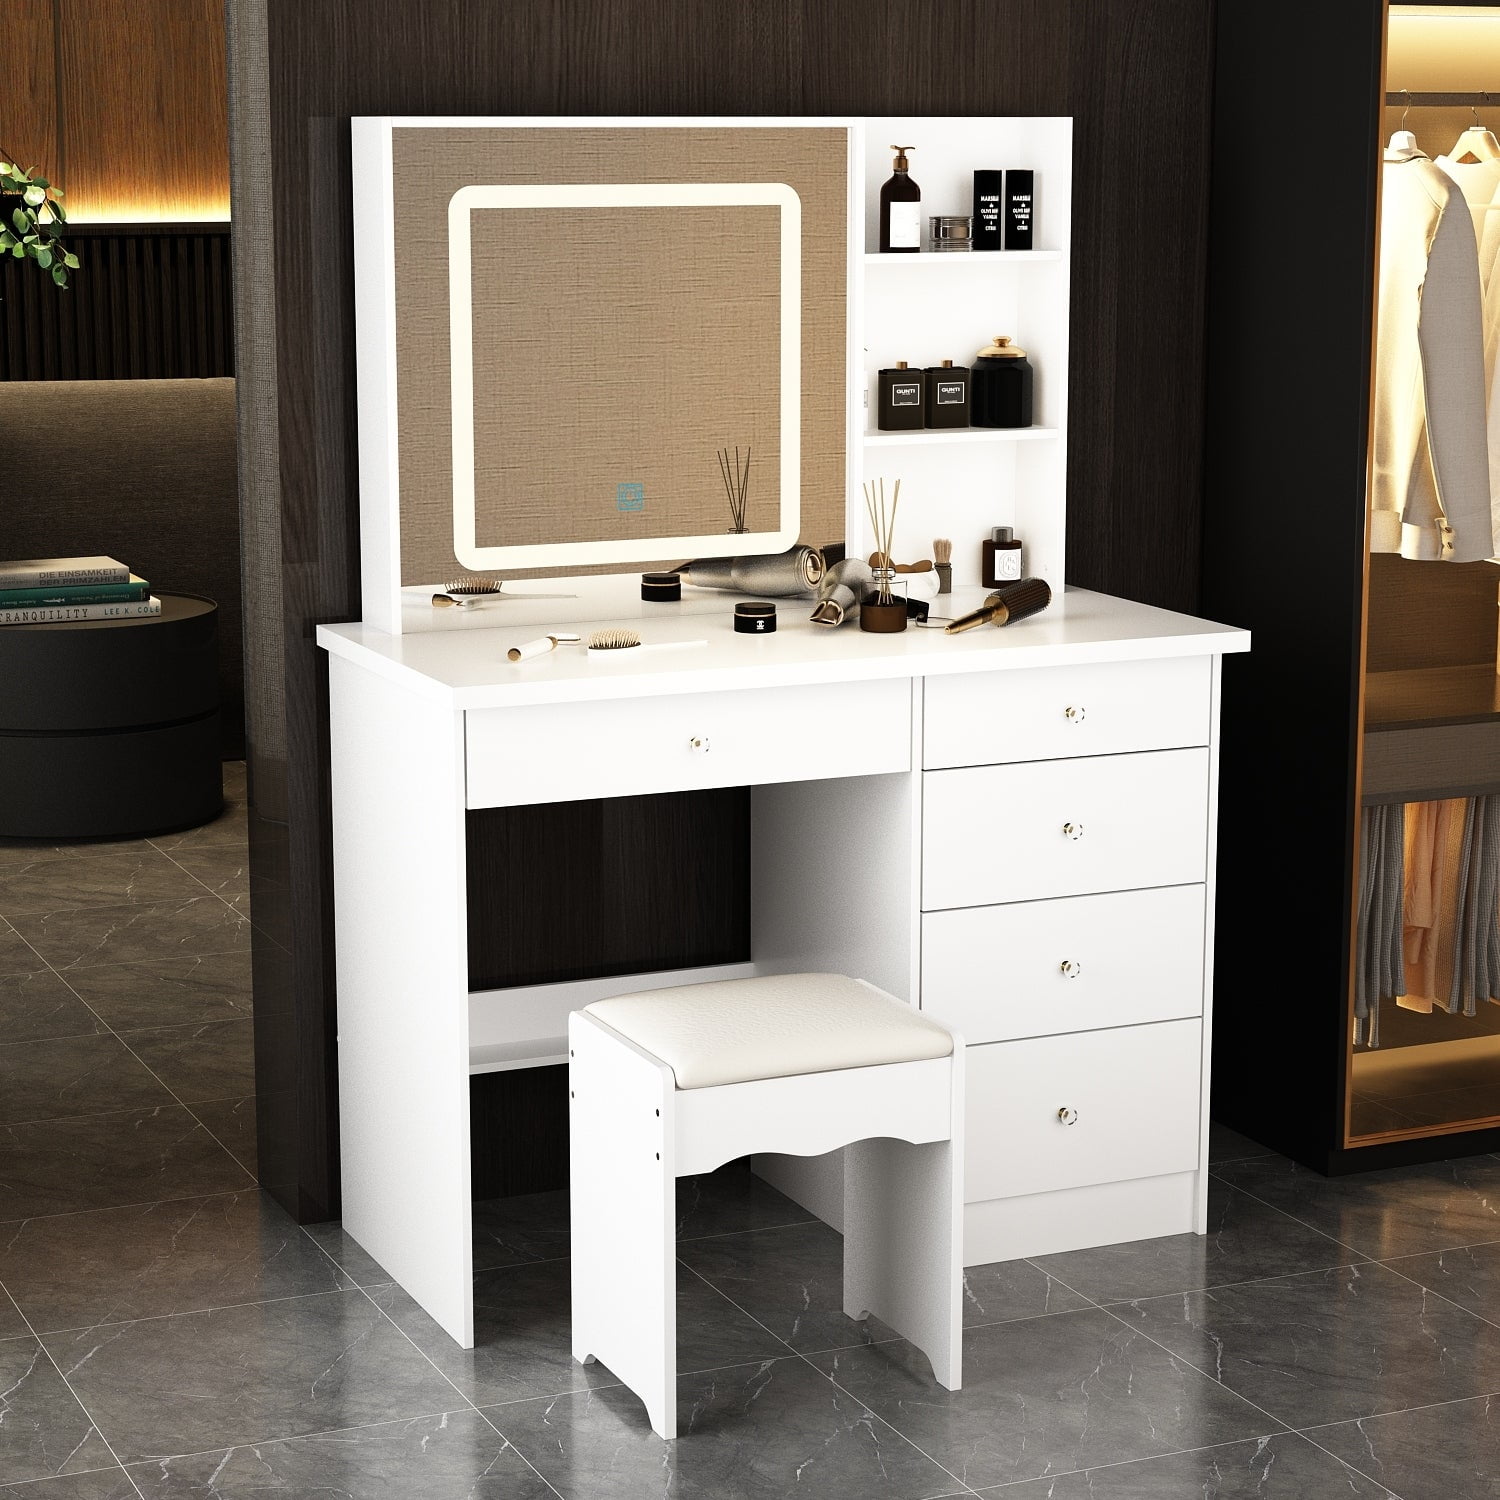 39.4'' Wide Makeup Vanity Set with Stool and Mirror - On Sale